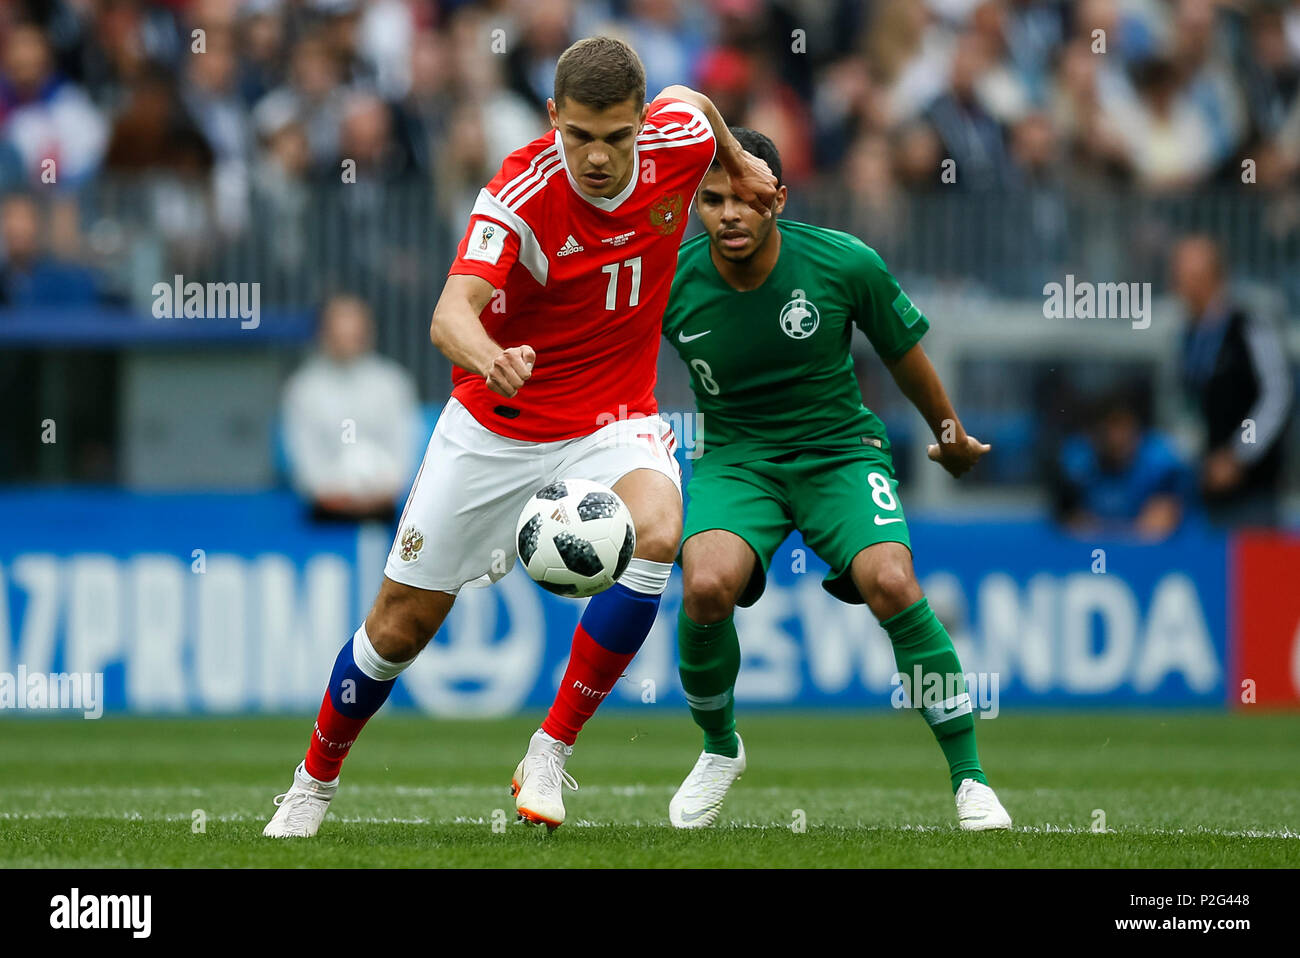 Moscow, Russia. 14th June 2018. Roman Zobnin of Russia and Yahya Al-Shehri of Saudi Arabia during the 2018 FIFA World Cup Group A match between Russia and Saudi Arabia at Luzhniki Stadium on June 14th 2018 in Moscow, Russia. Credit: PHC Images/Alamy Live News Stock Photo